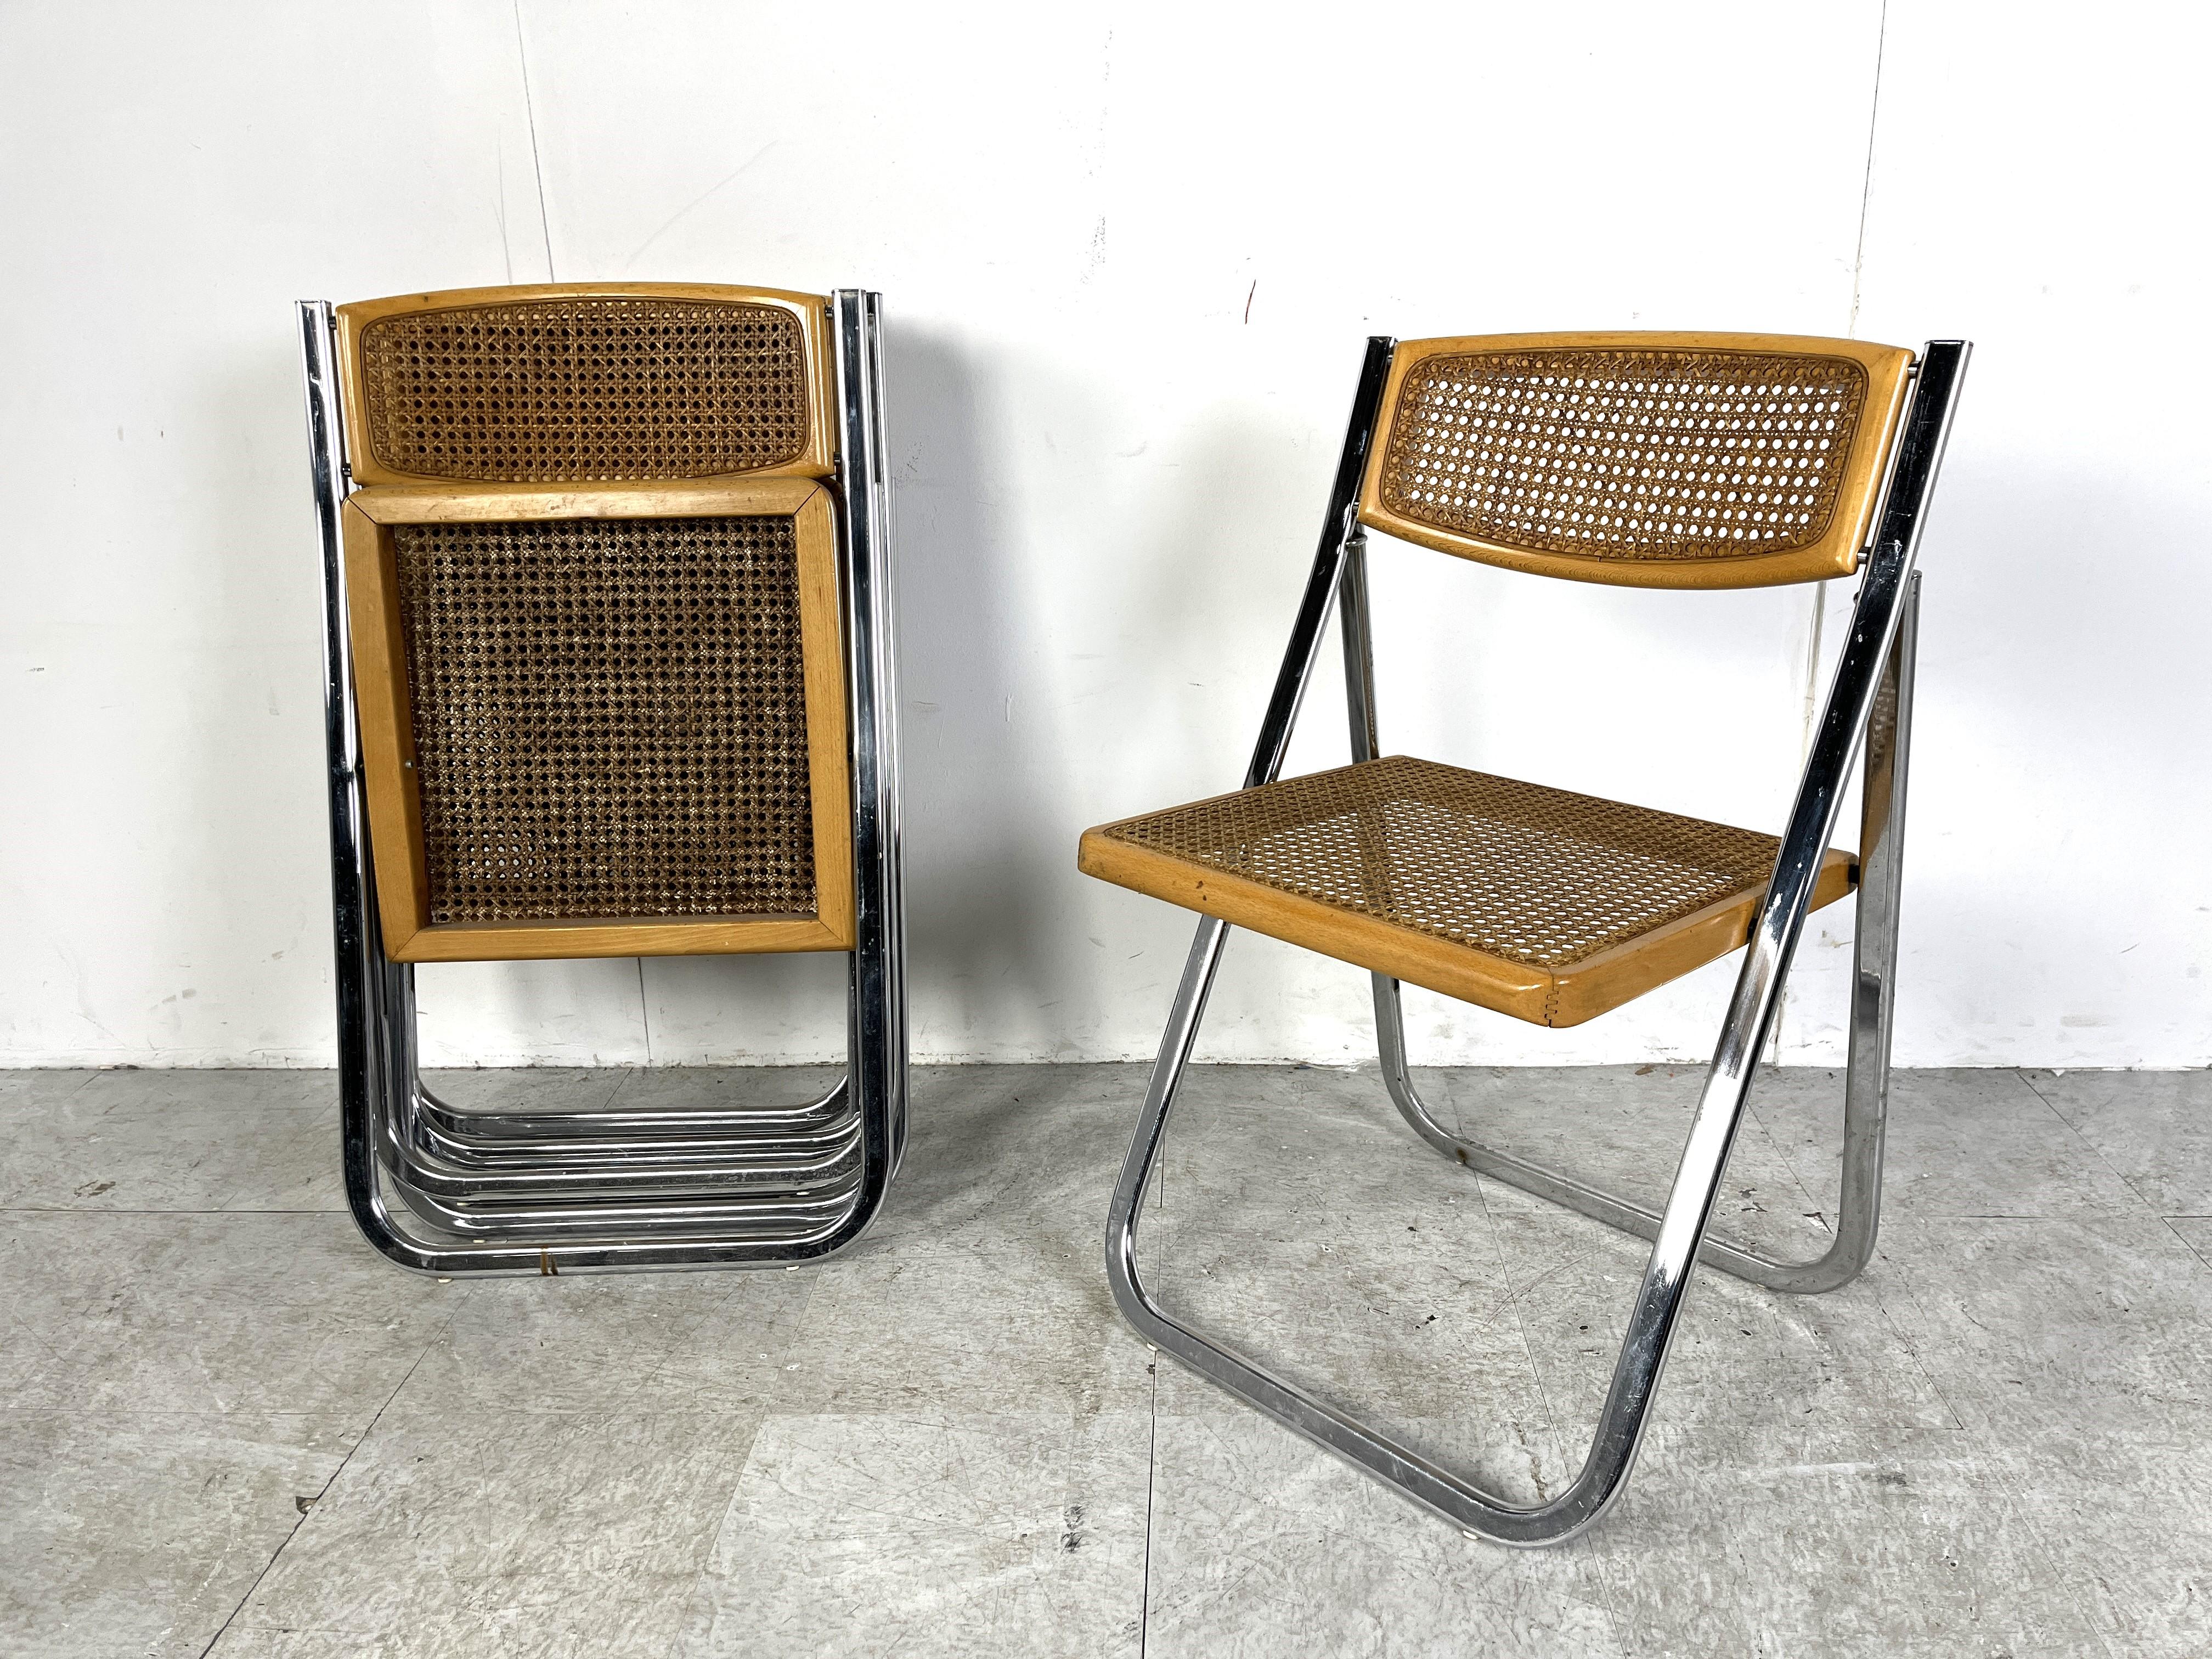 Vintage rattan folding chairs, 1970s - set of 4 For Sale 1